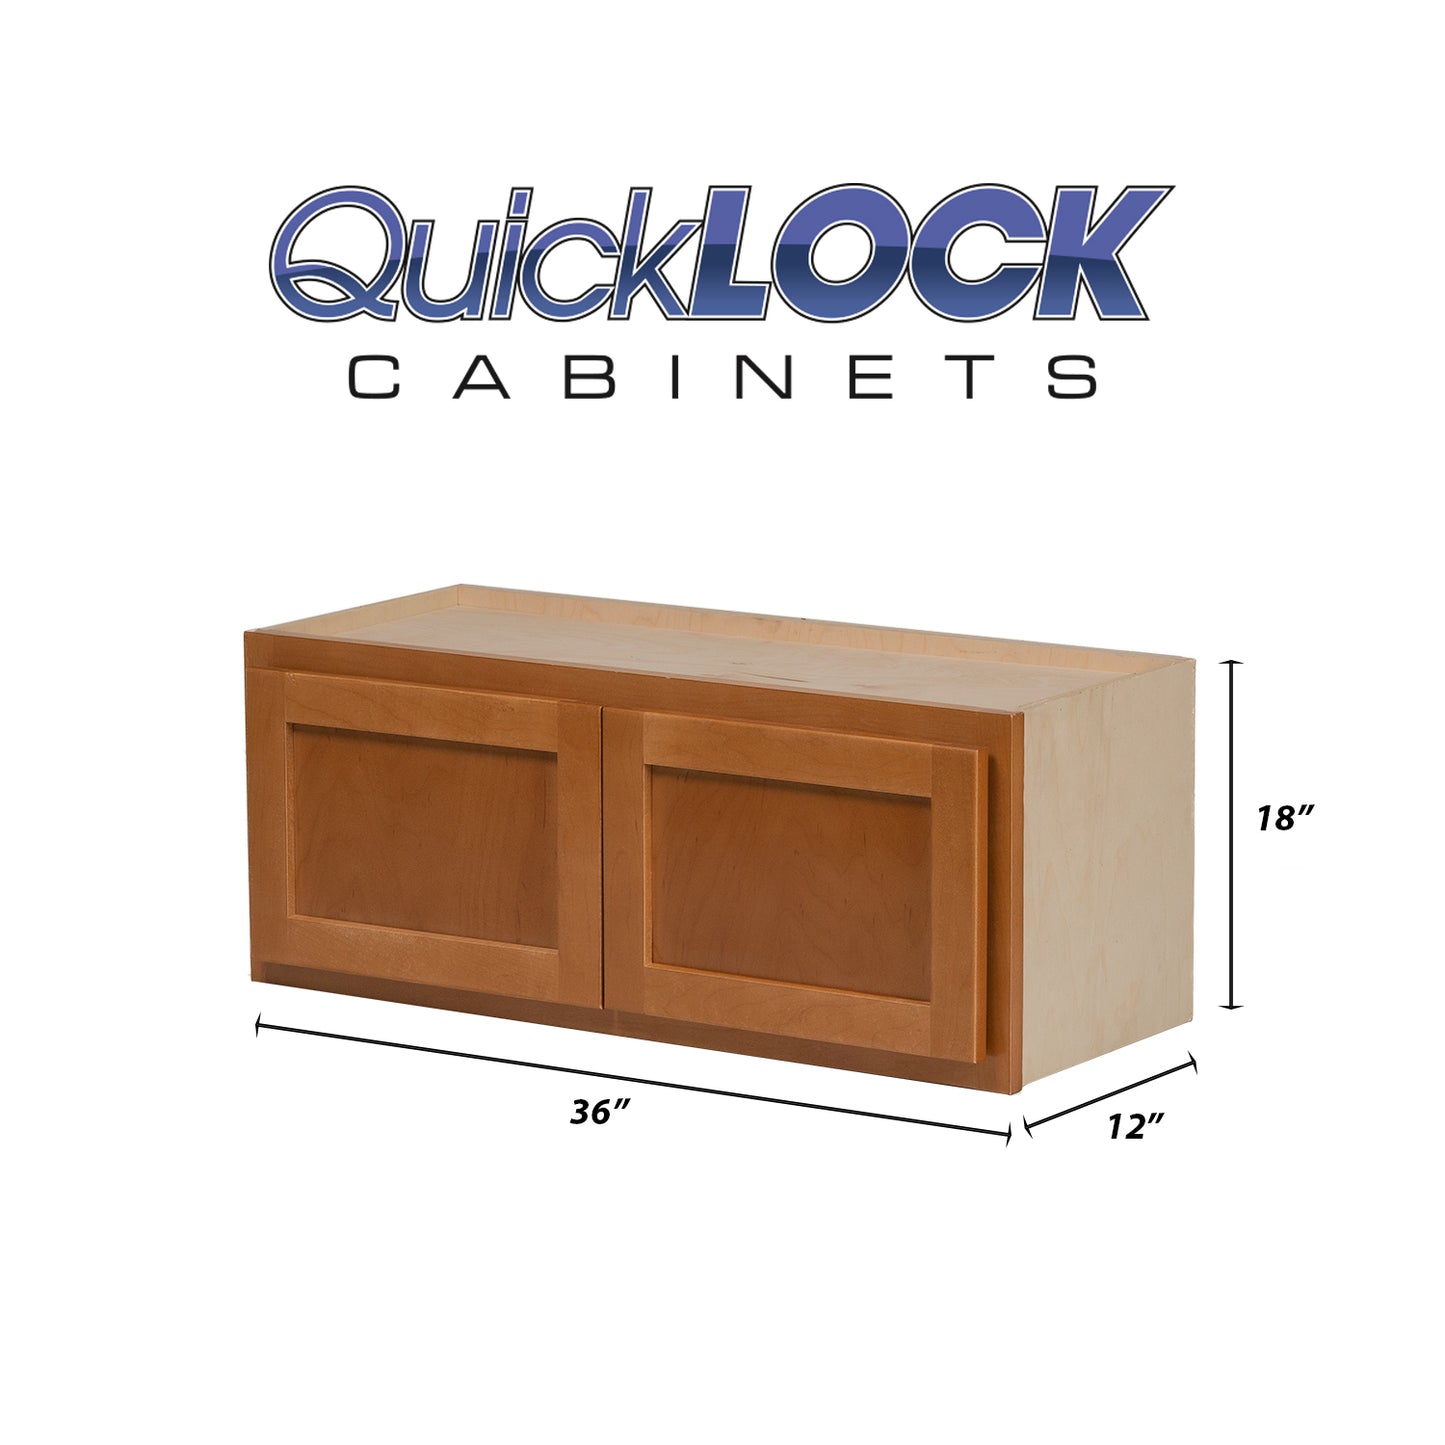 Quicklock RTA (Ready-to-Assemble) Provincial Stain 36"Wx18"Hx12"D Refrigerator Wall Cabinet